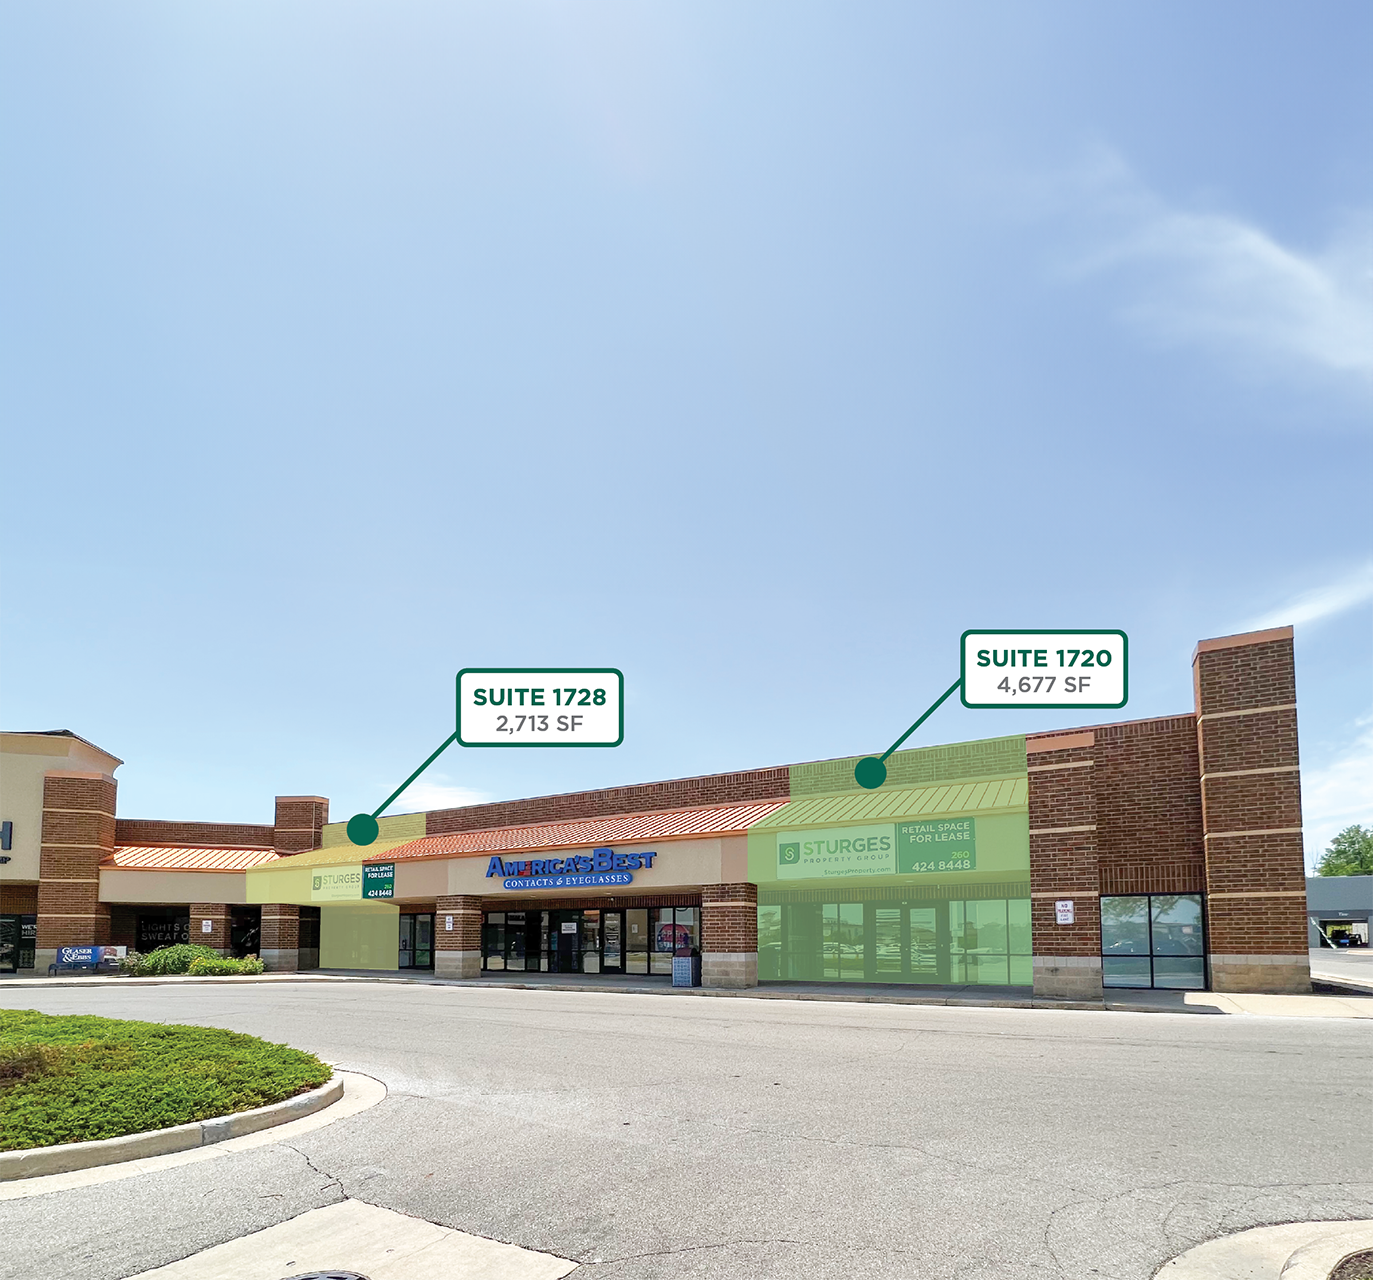 Sturges Property Group - Retail Space For Lease Southwest Fort Wayne Apple Glen Shopping Center